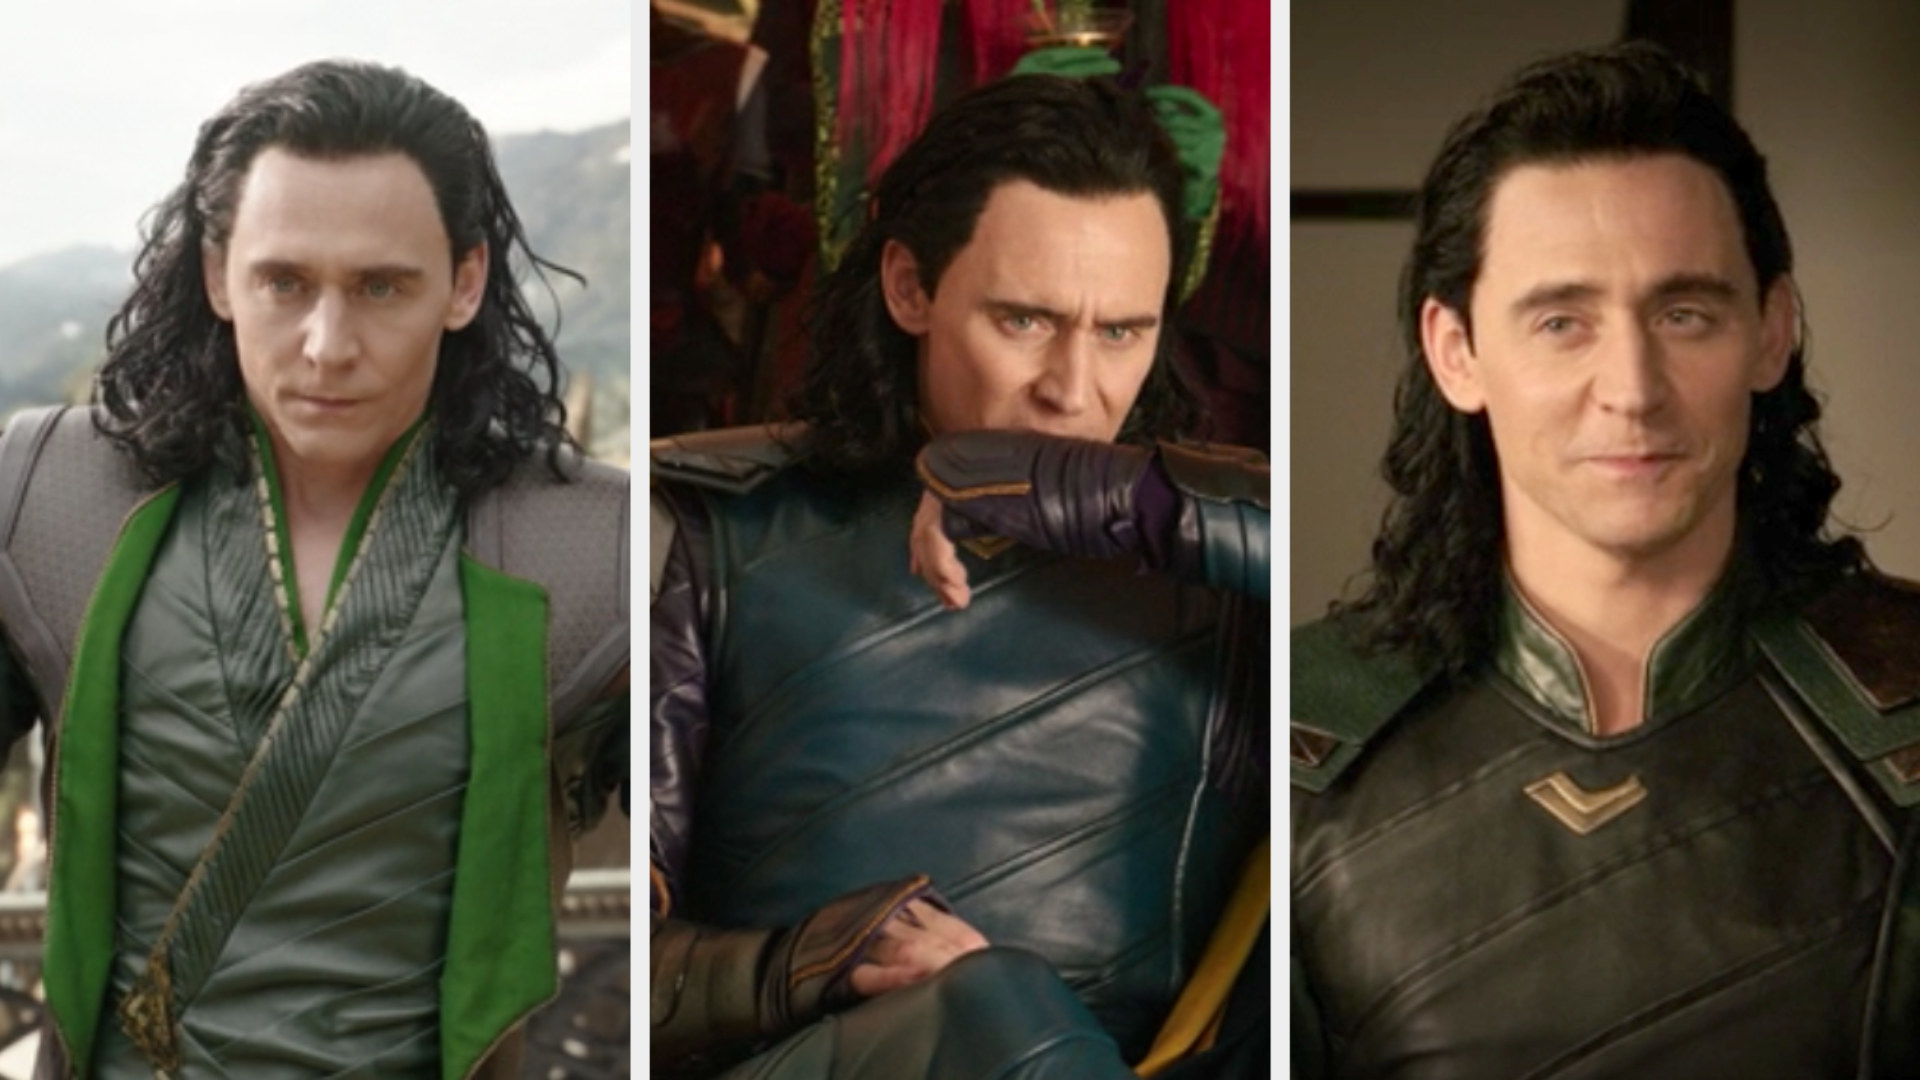 In the Ragnarok design, Francisco wanted Loki's design to look unbalanced by using a lot of asymmetrical, diagonal lines.